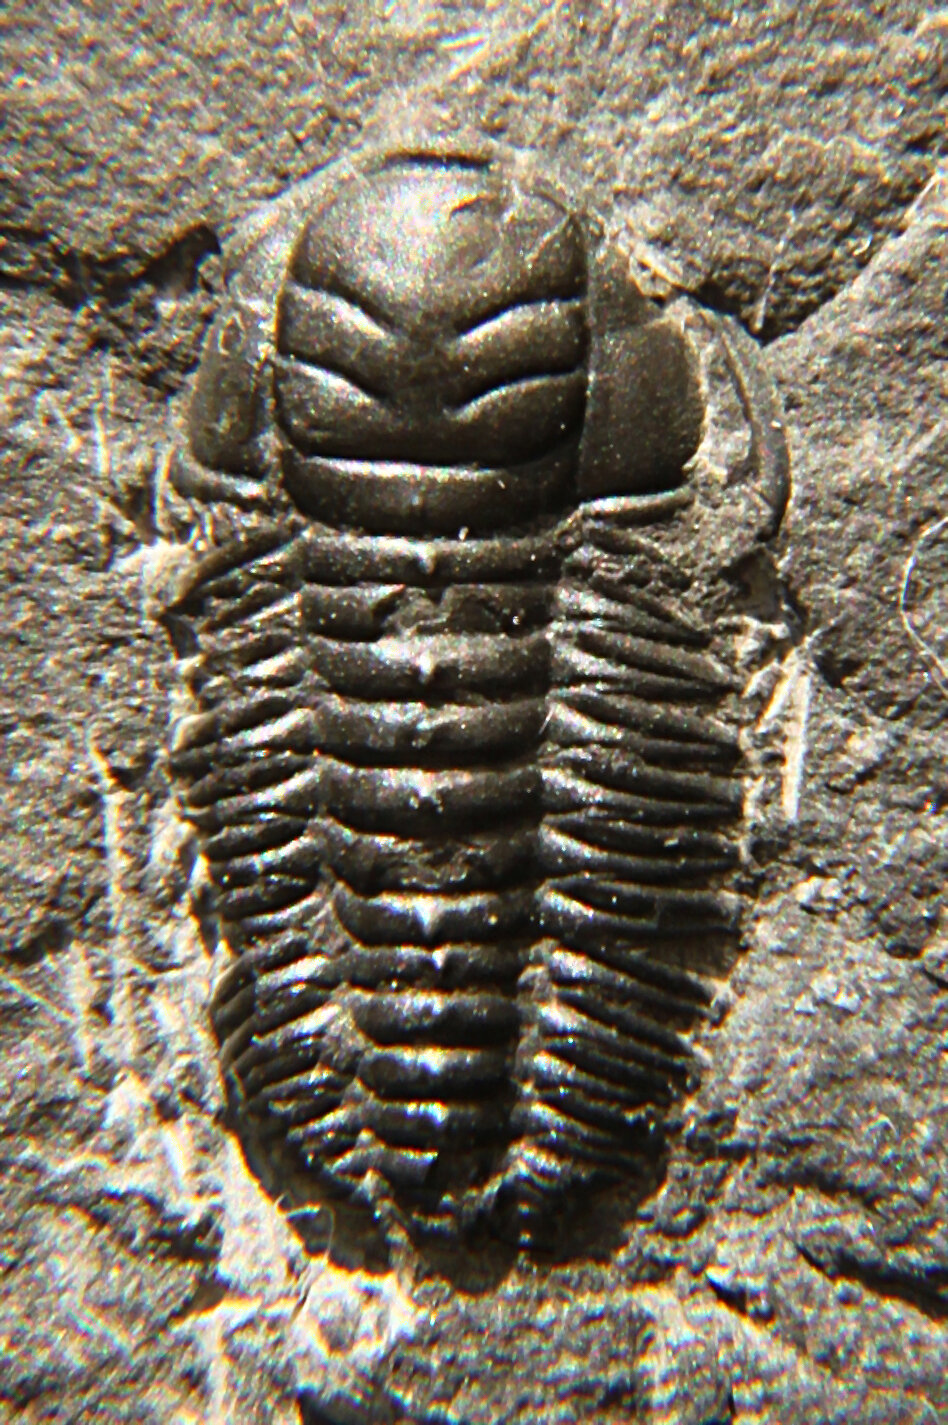 Trilobites' growth may have resembled that of modern marine crustaceans